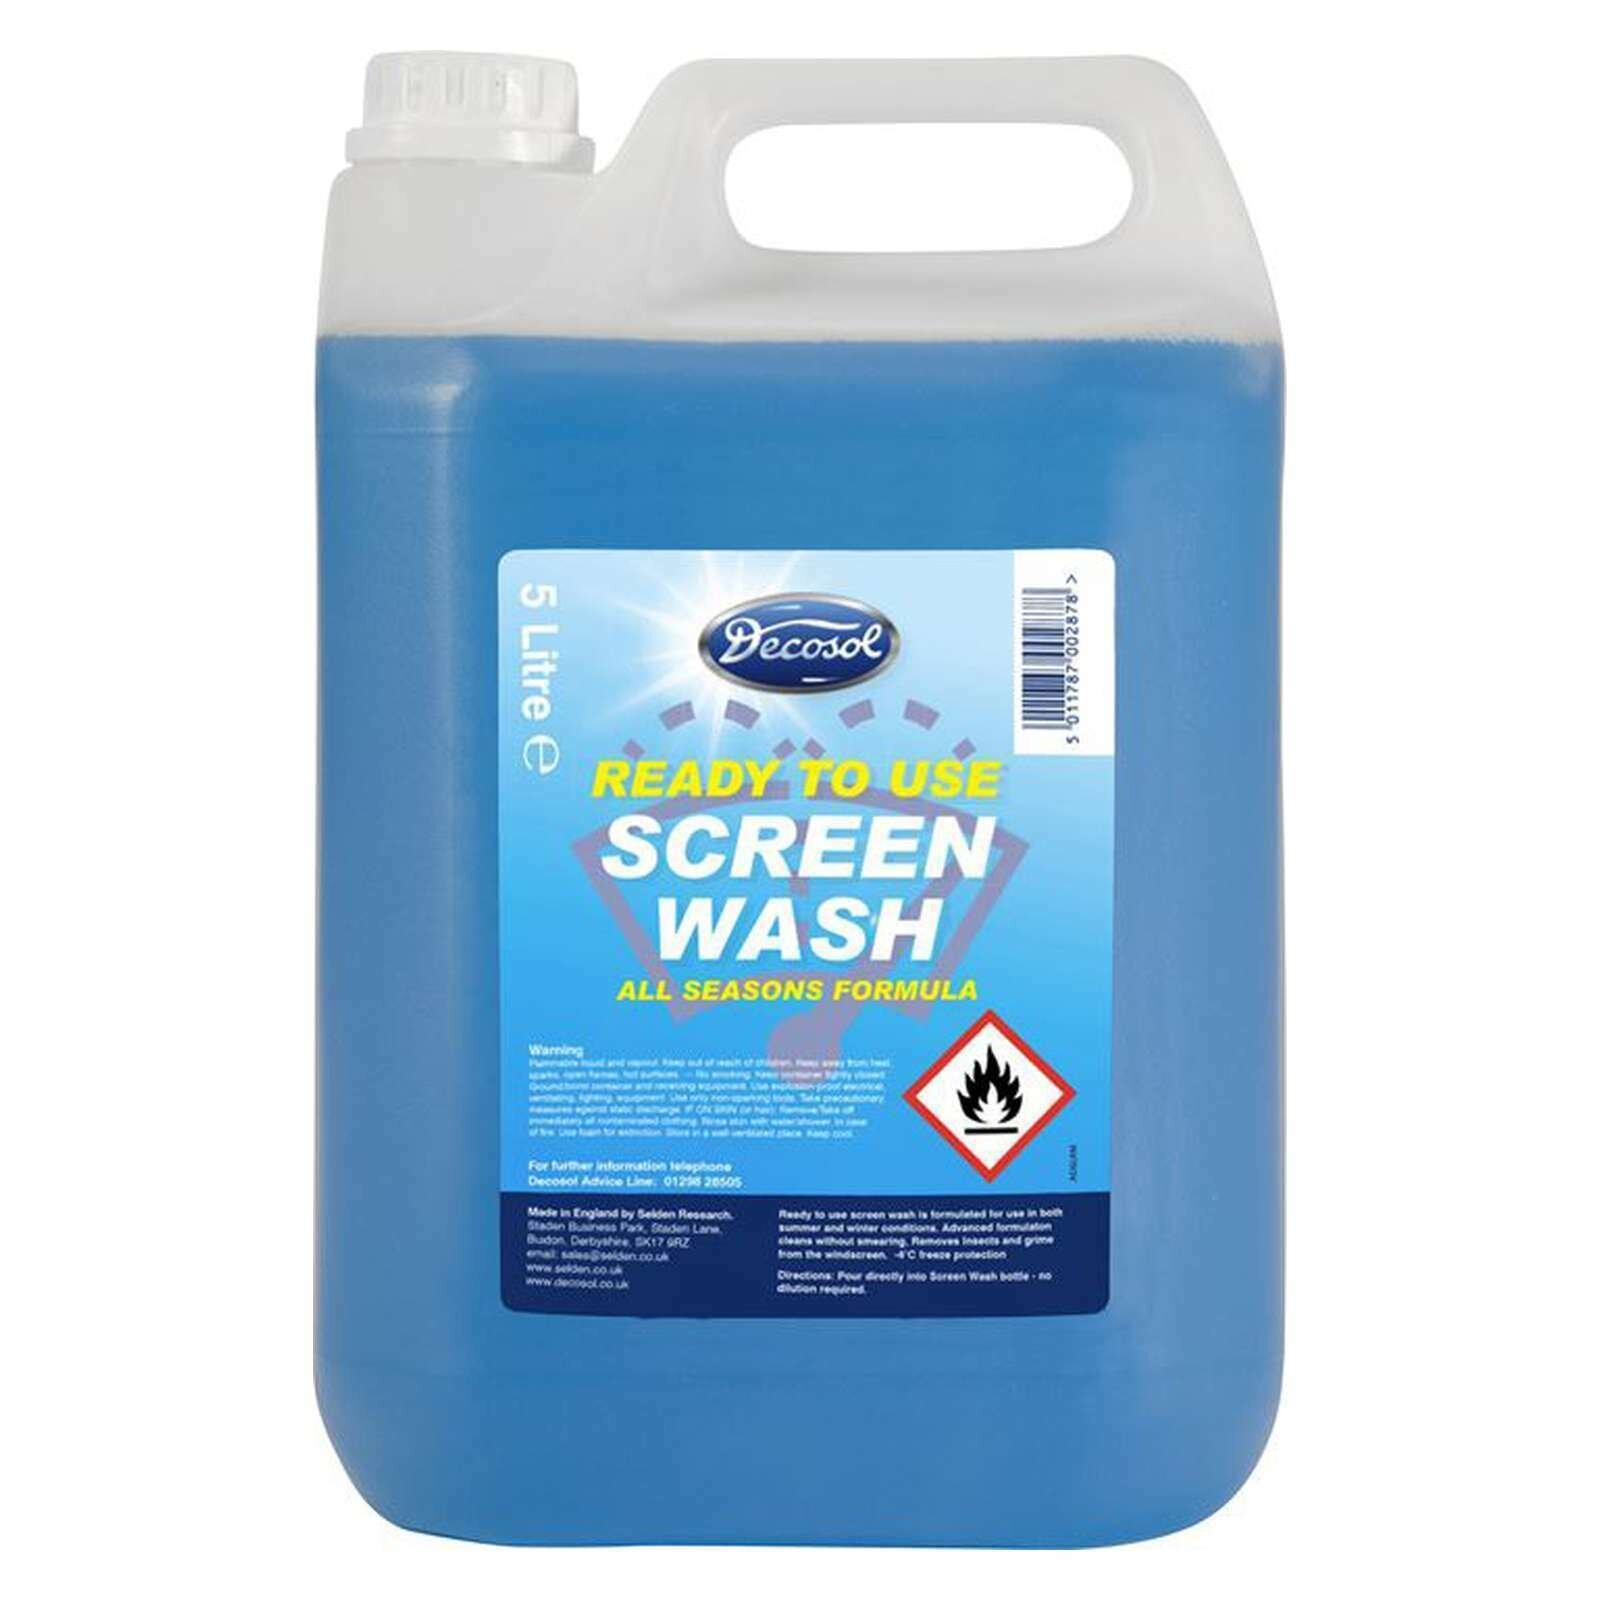 DECOSOL Ready Mix Screen Wash 5 Litre – 2 Pack